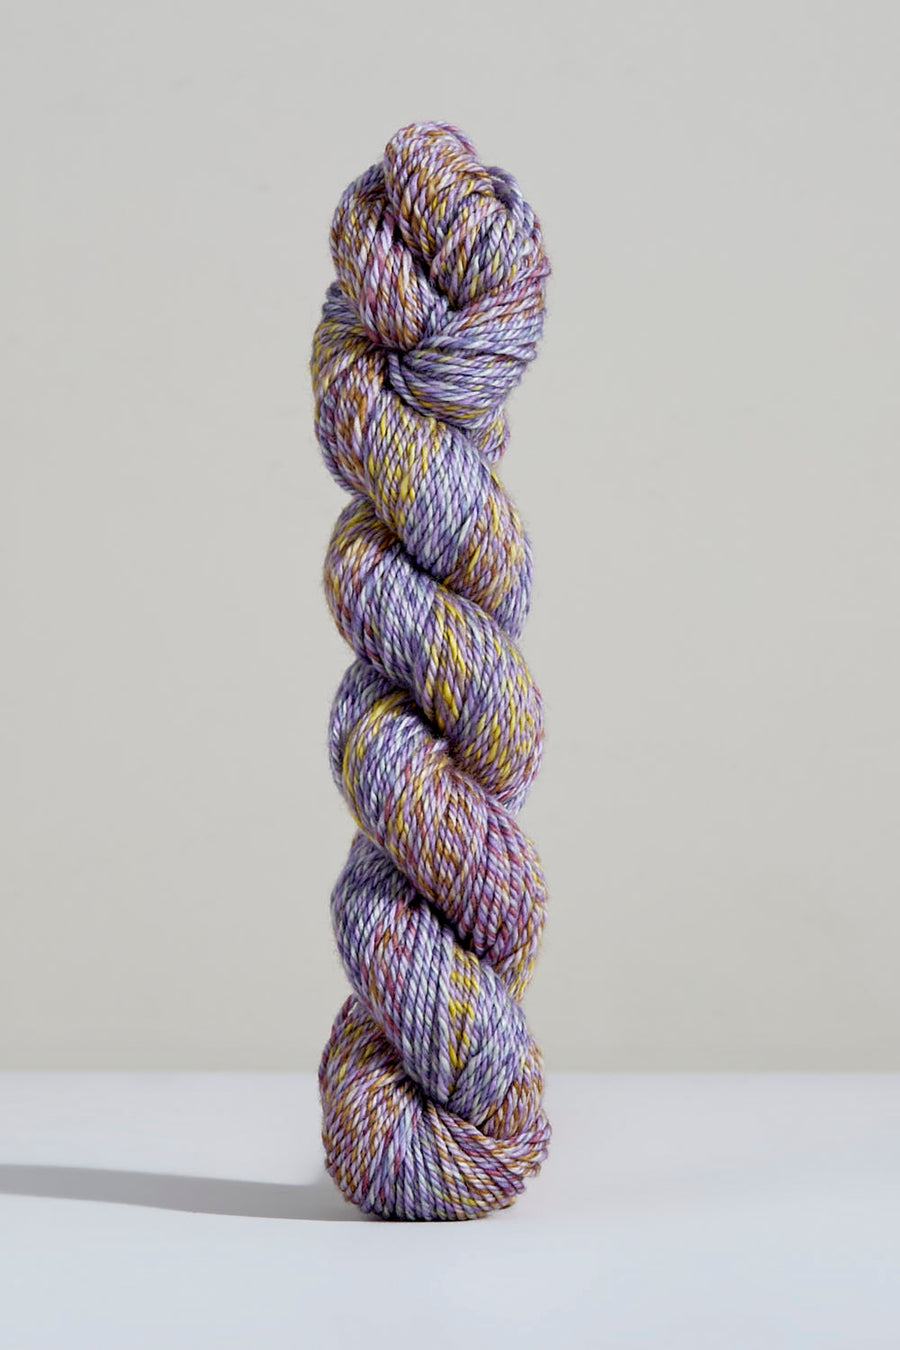 Spiral Grain Light Worsted | Wisteria